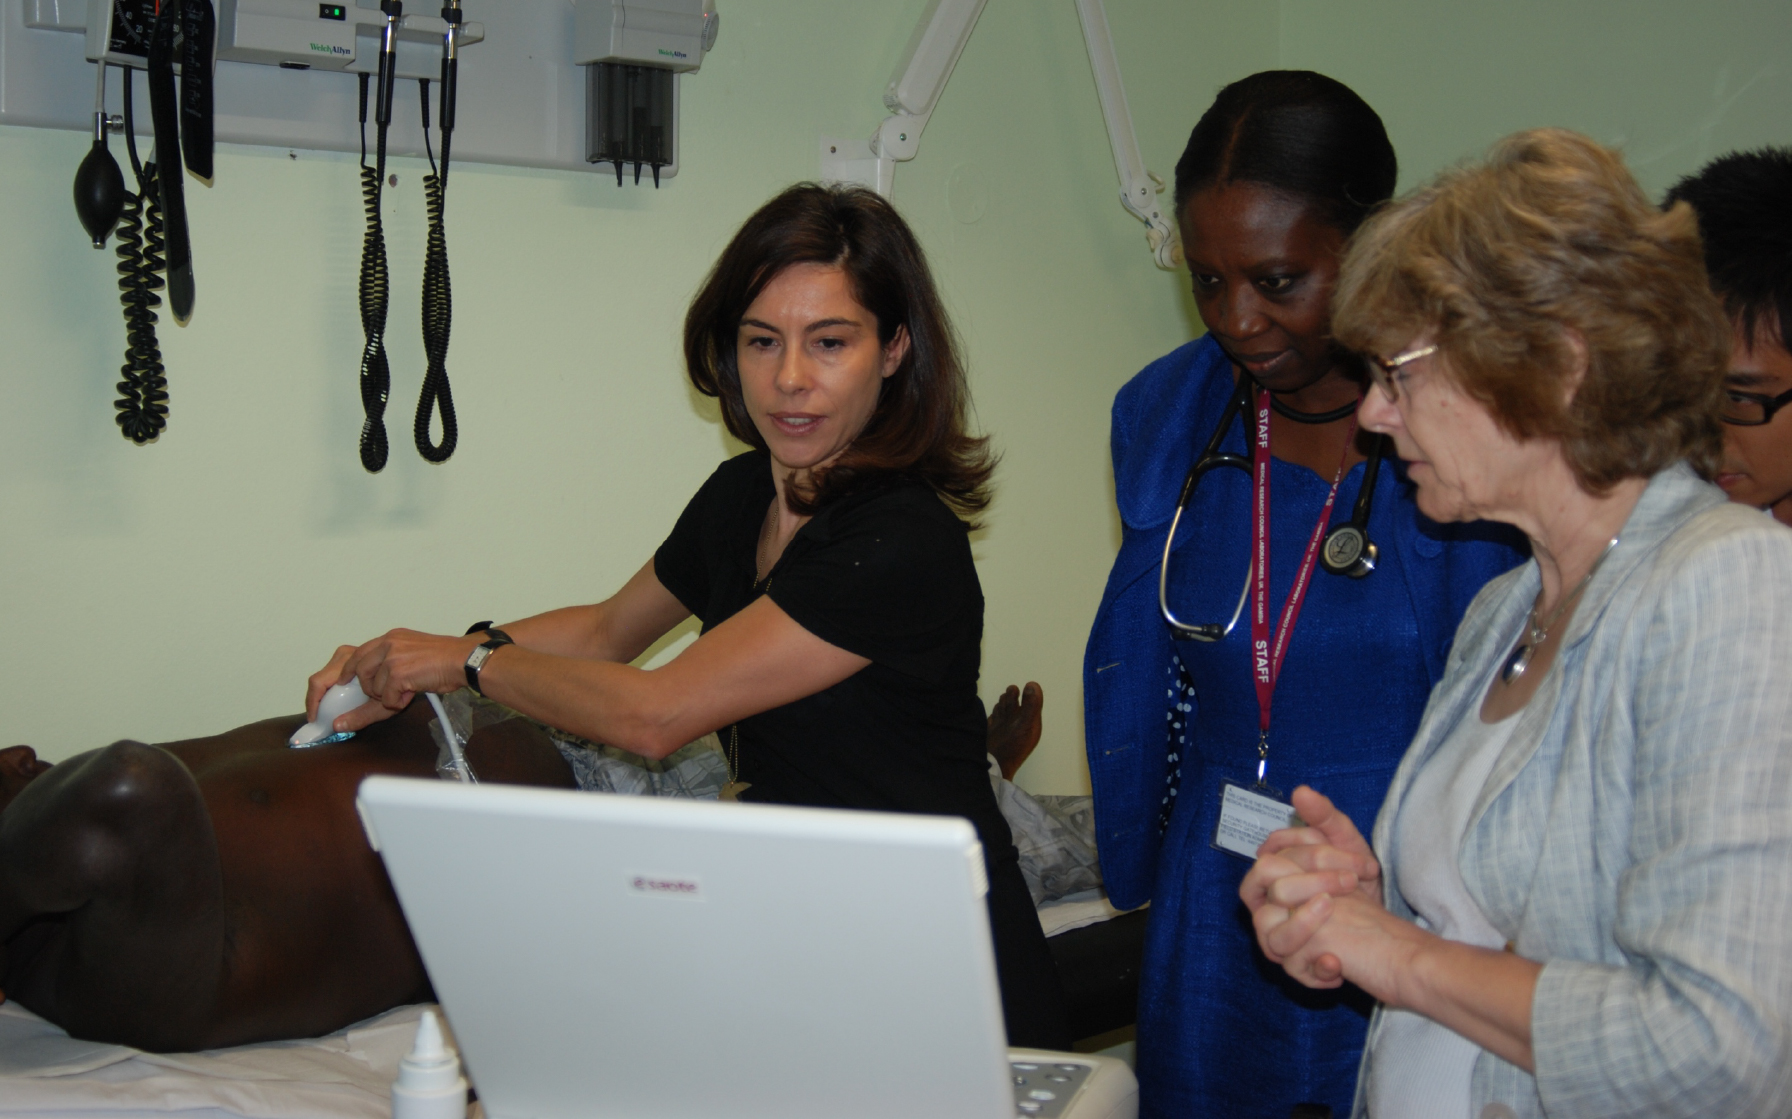 Prof Maud Lemoine using scanning equipment in The Gambia, with Dr Mary Crofton (radiologist at Imperial College Healthcare NHS Trust) and colleagues.